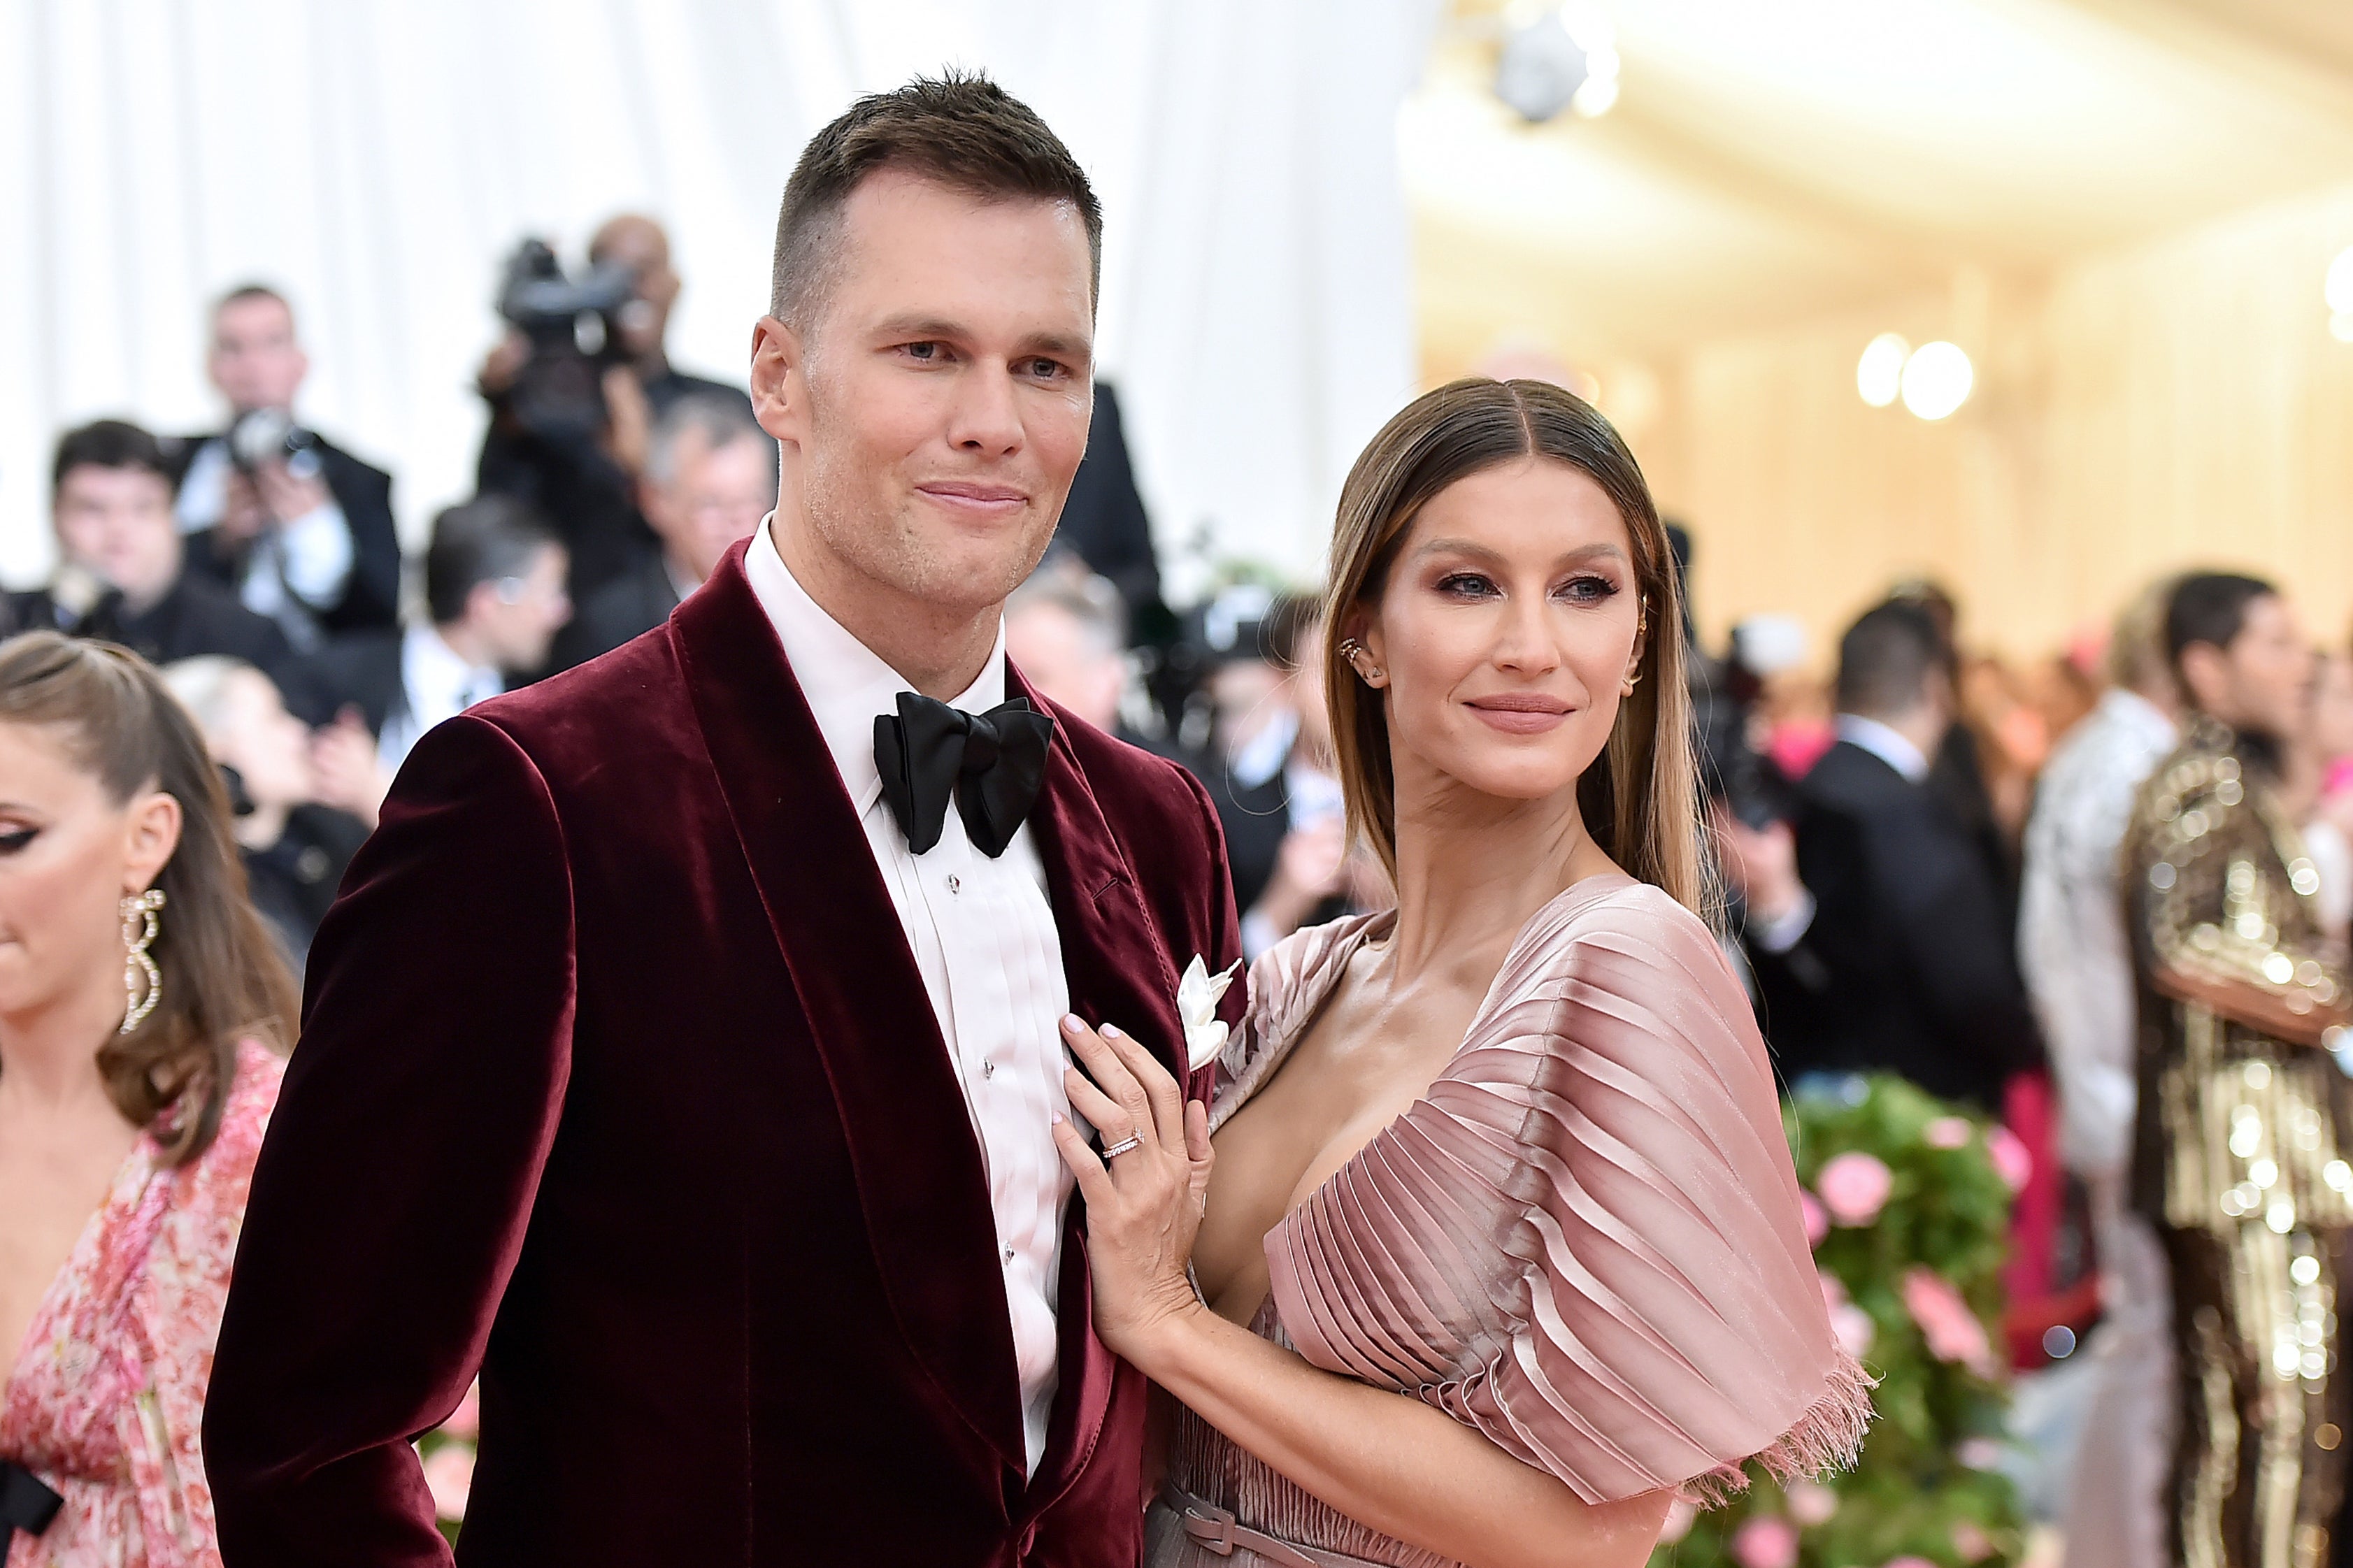 Gisele Bündchen And Tom Brady’s Kids Were Apparently “Affected” By His “Irresponsible” Netflix Roast Amid Reports That Gisele Was “Hurt” By The Jokes About Their Divorce